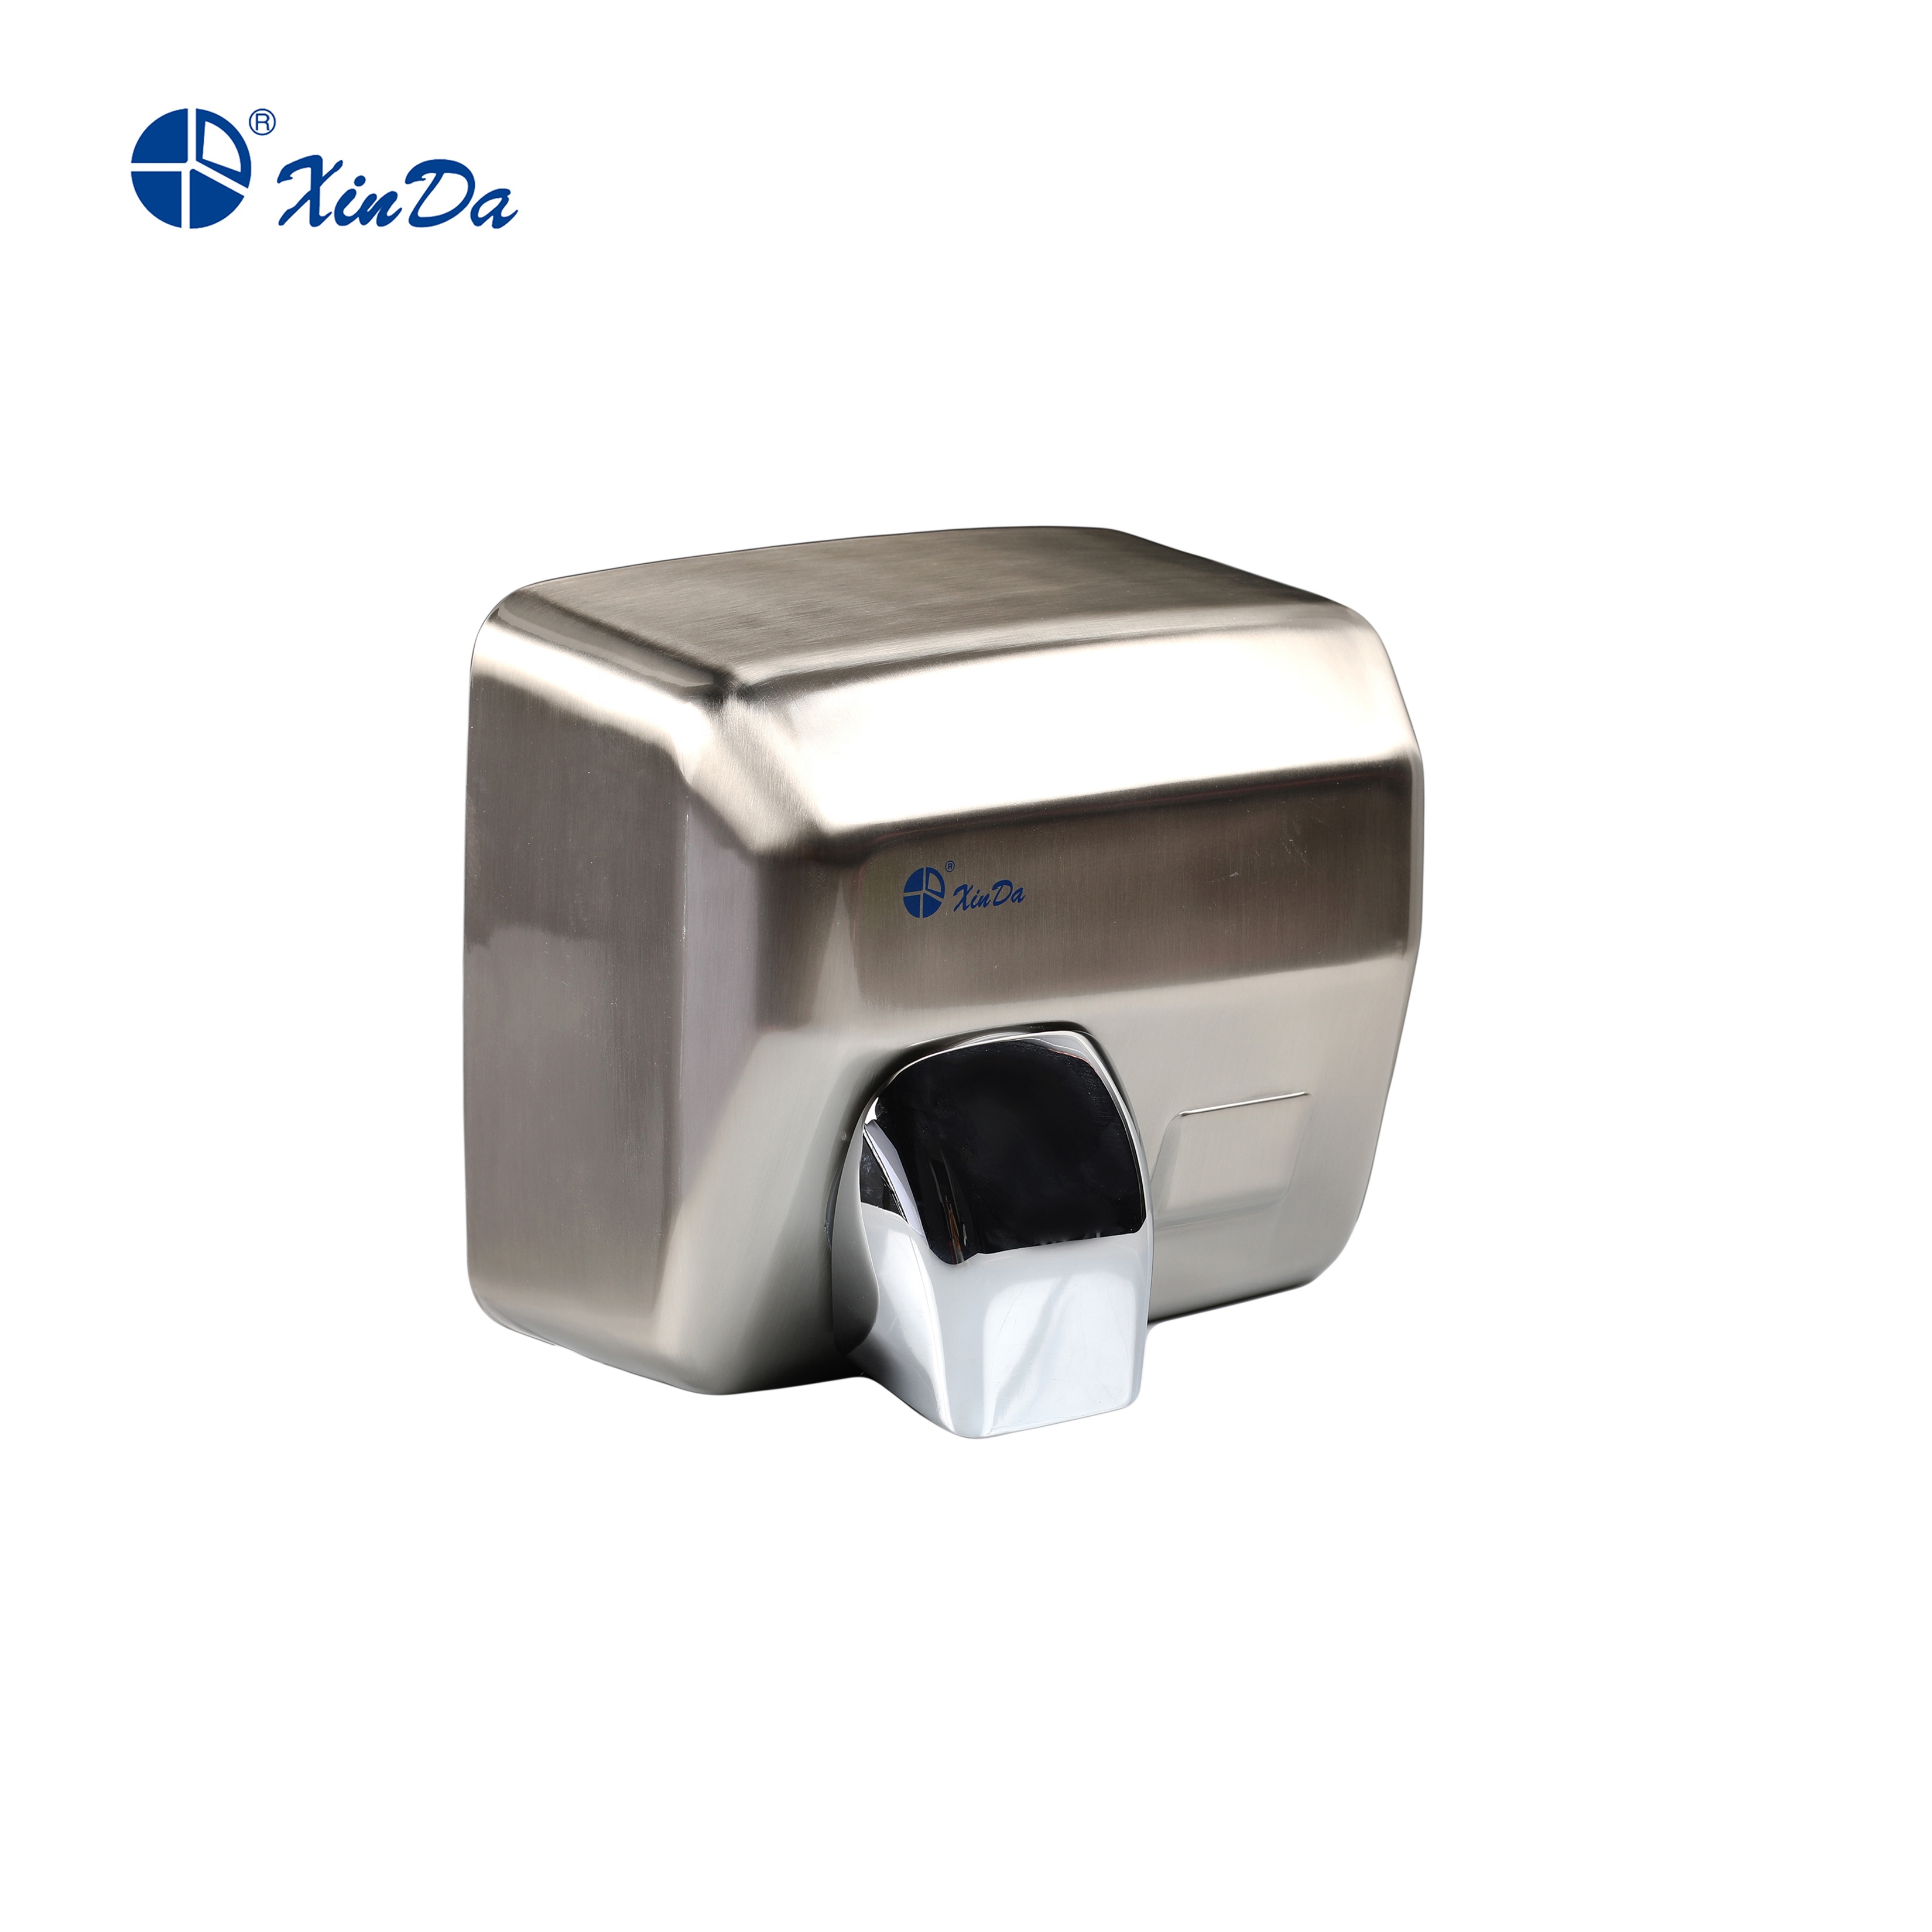 Things to Consider When Purchasing an Automatic Hand Dryer